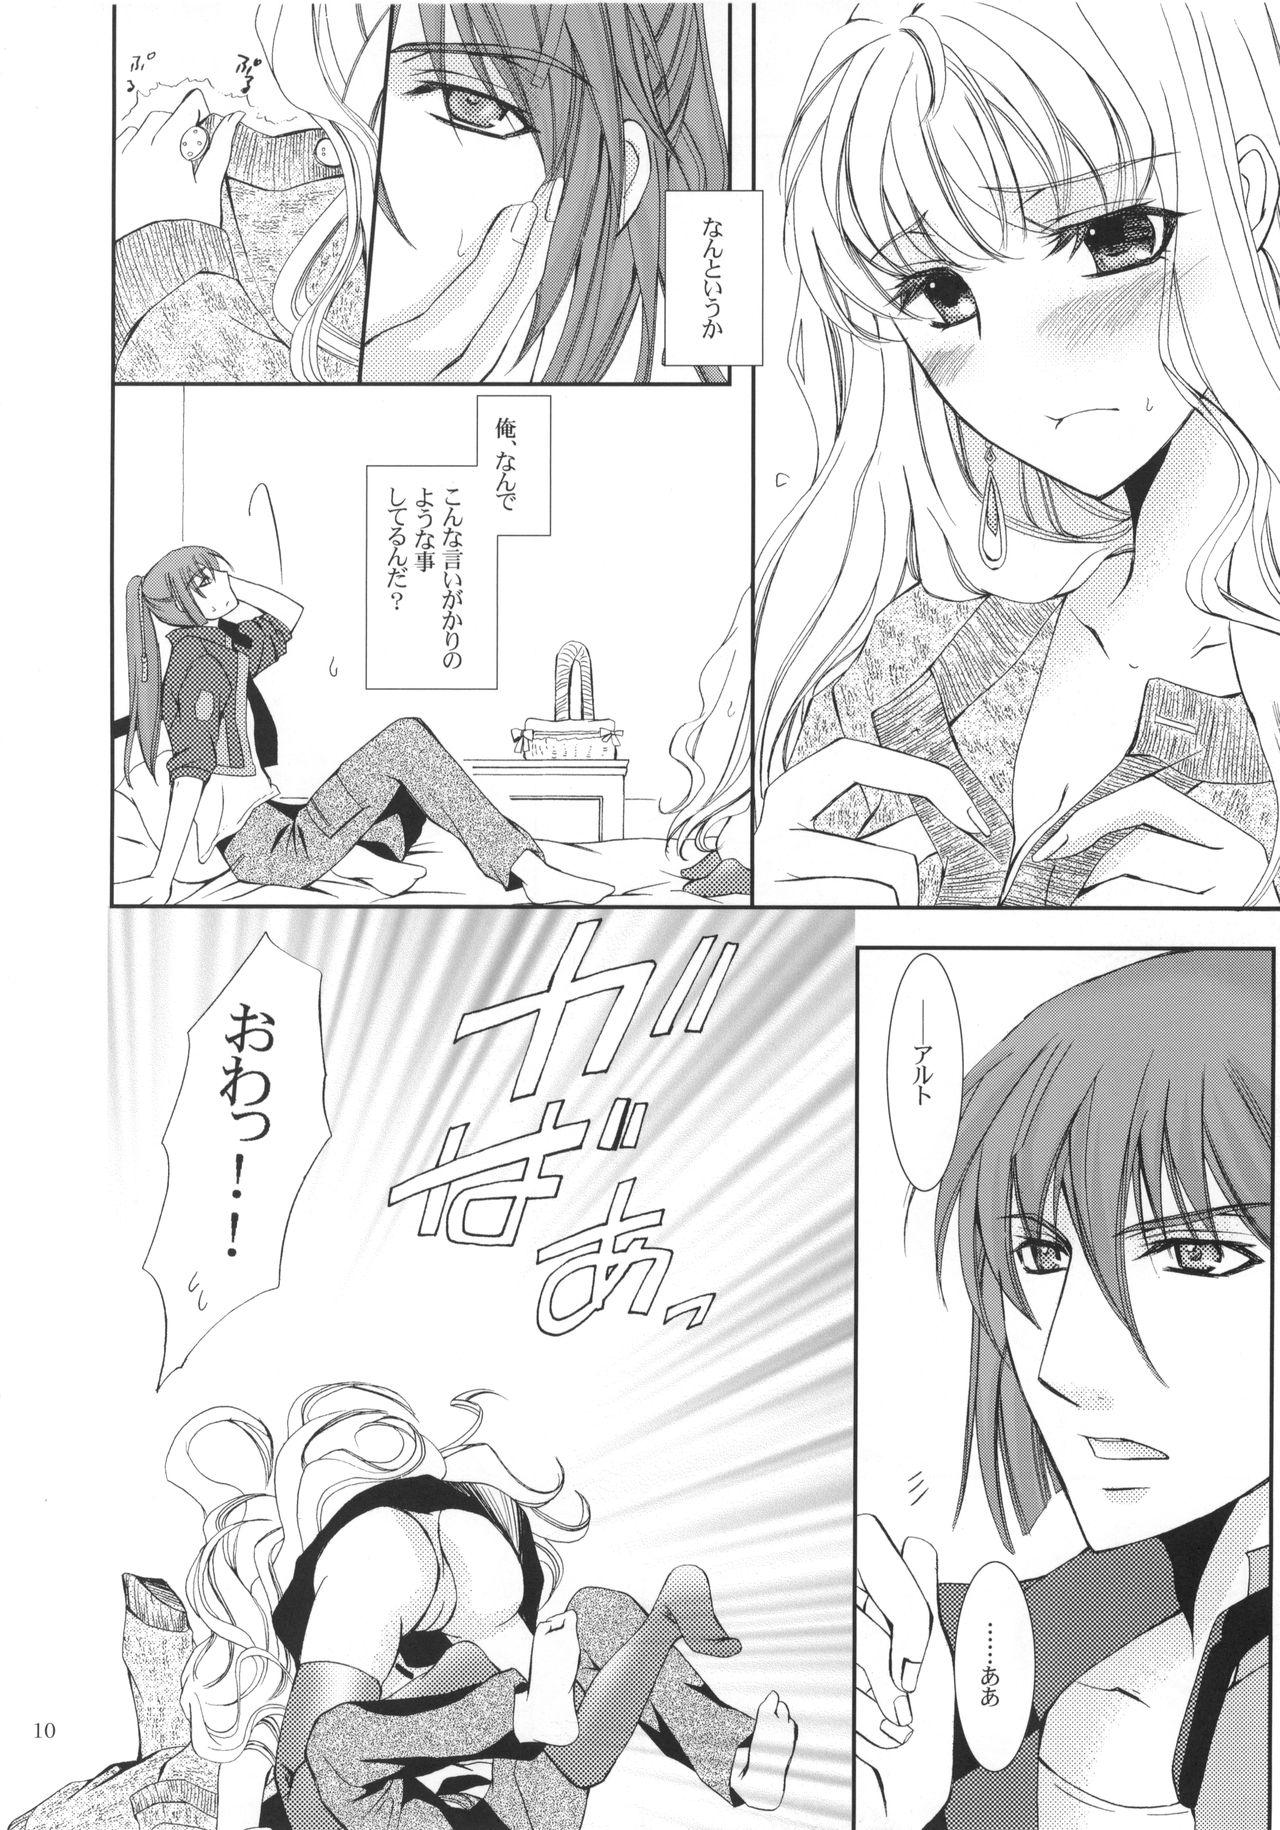 Tits Sweets Master - Macross frontier Fucking Sex - Page 9